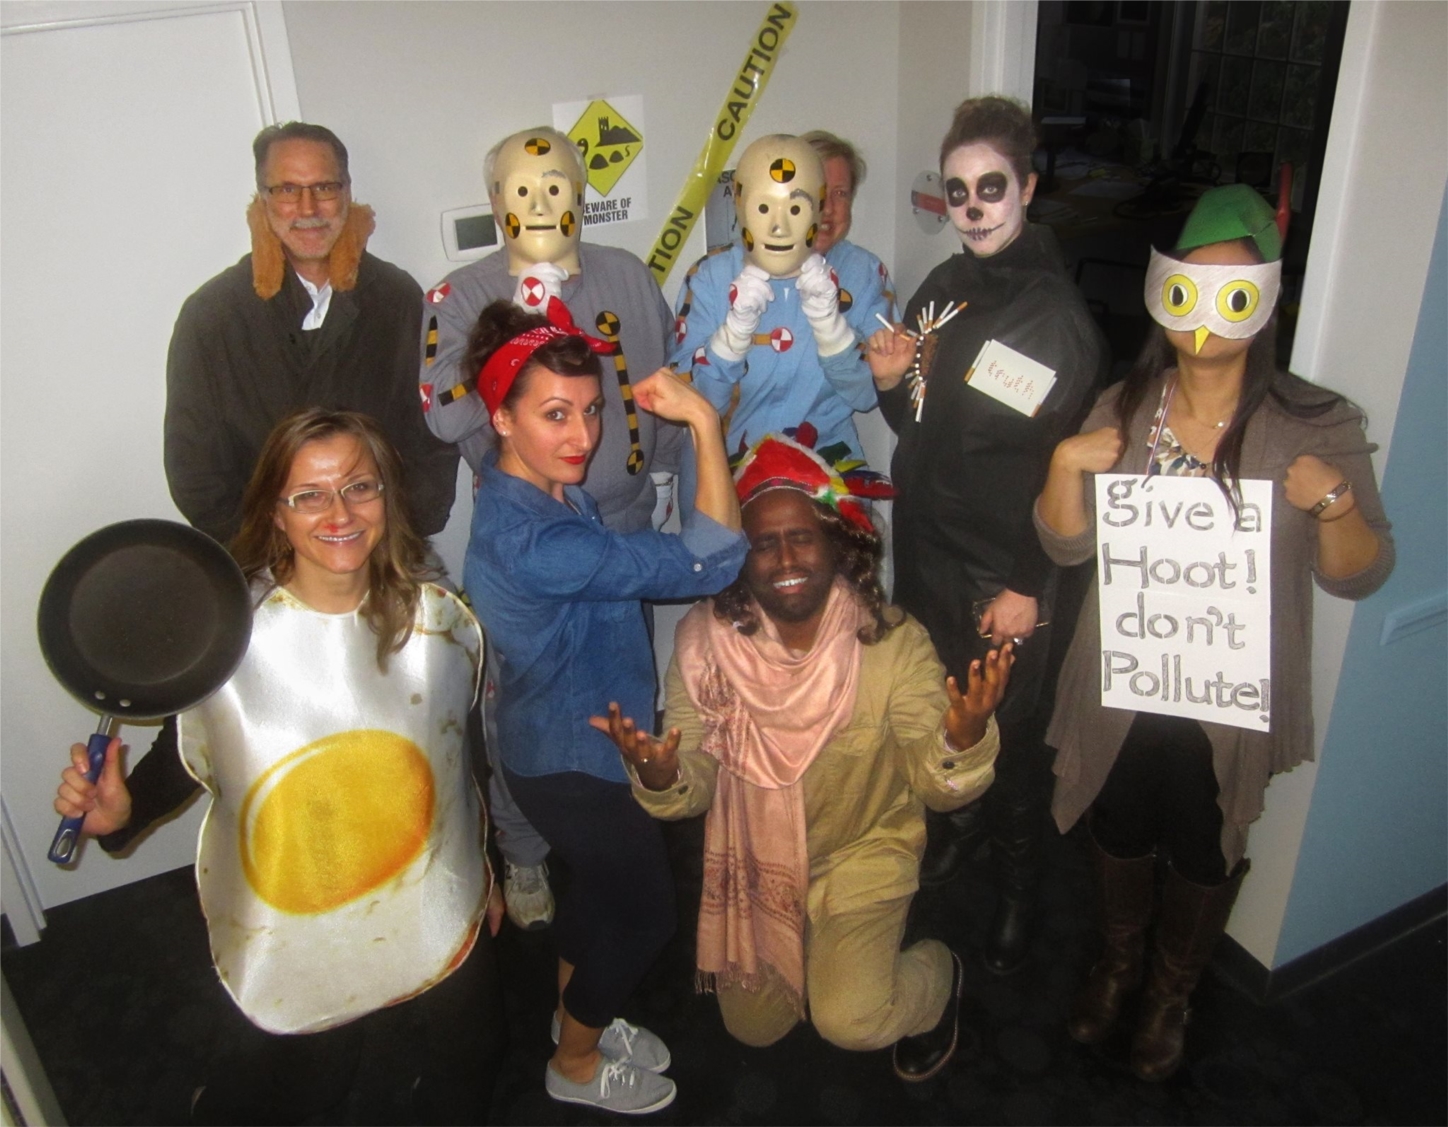 Boo Bash Haloween party: winning costumes depict famous PSAs